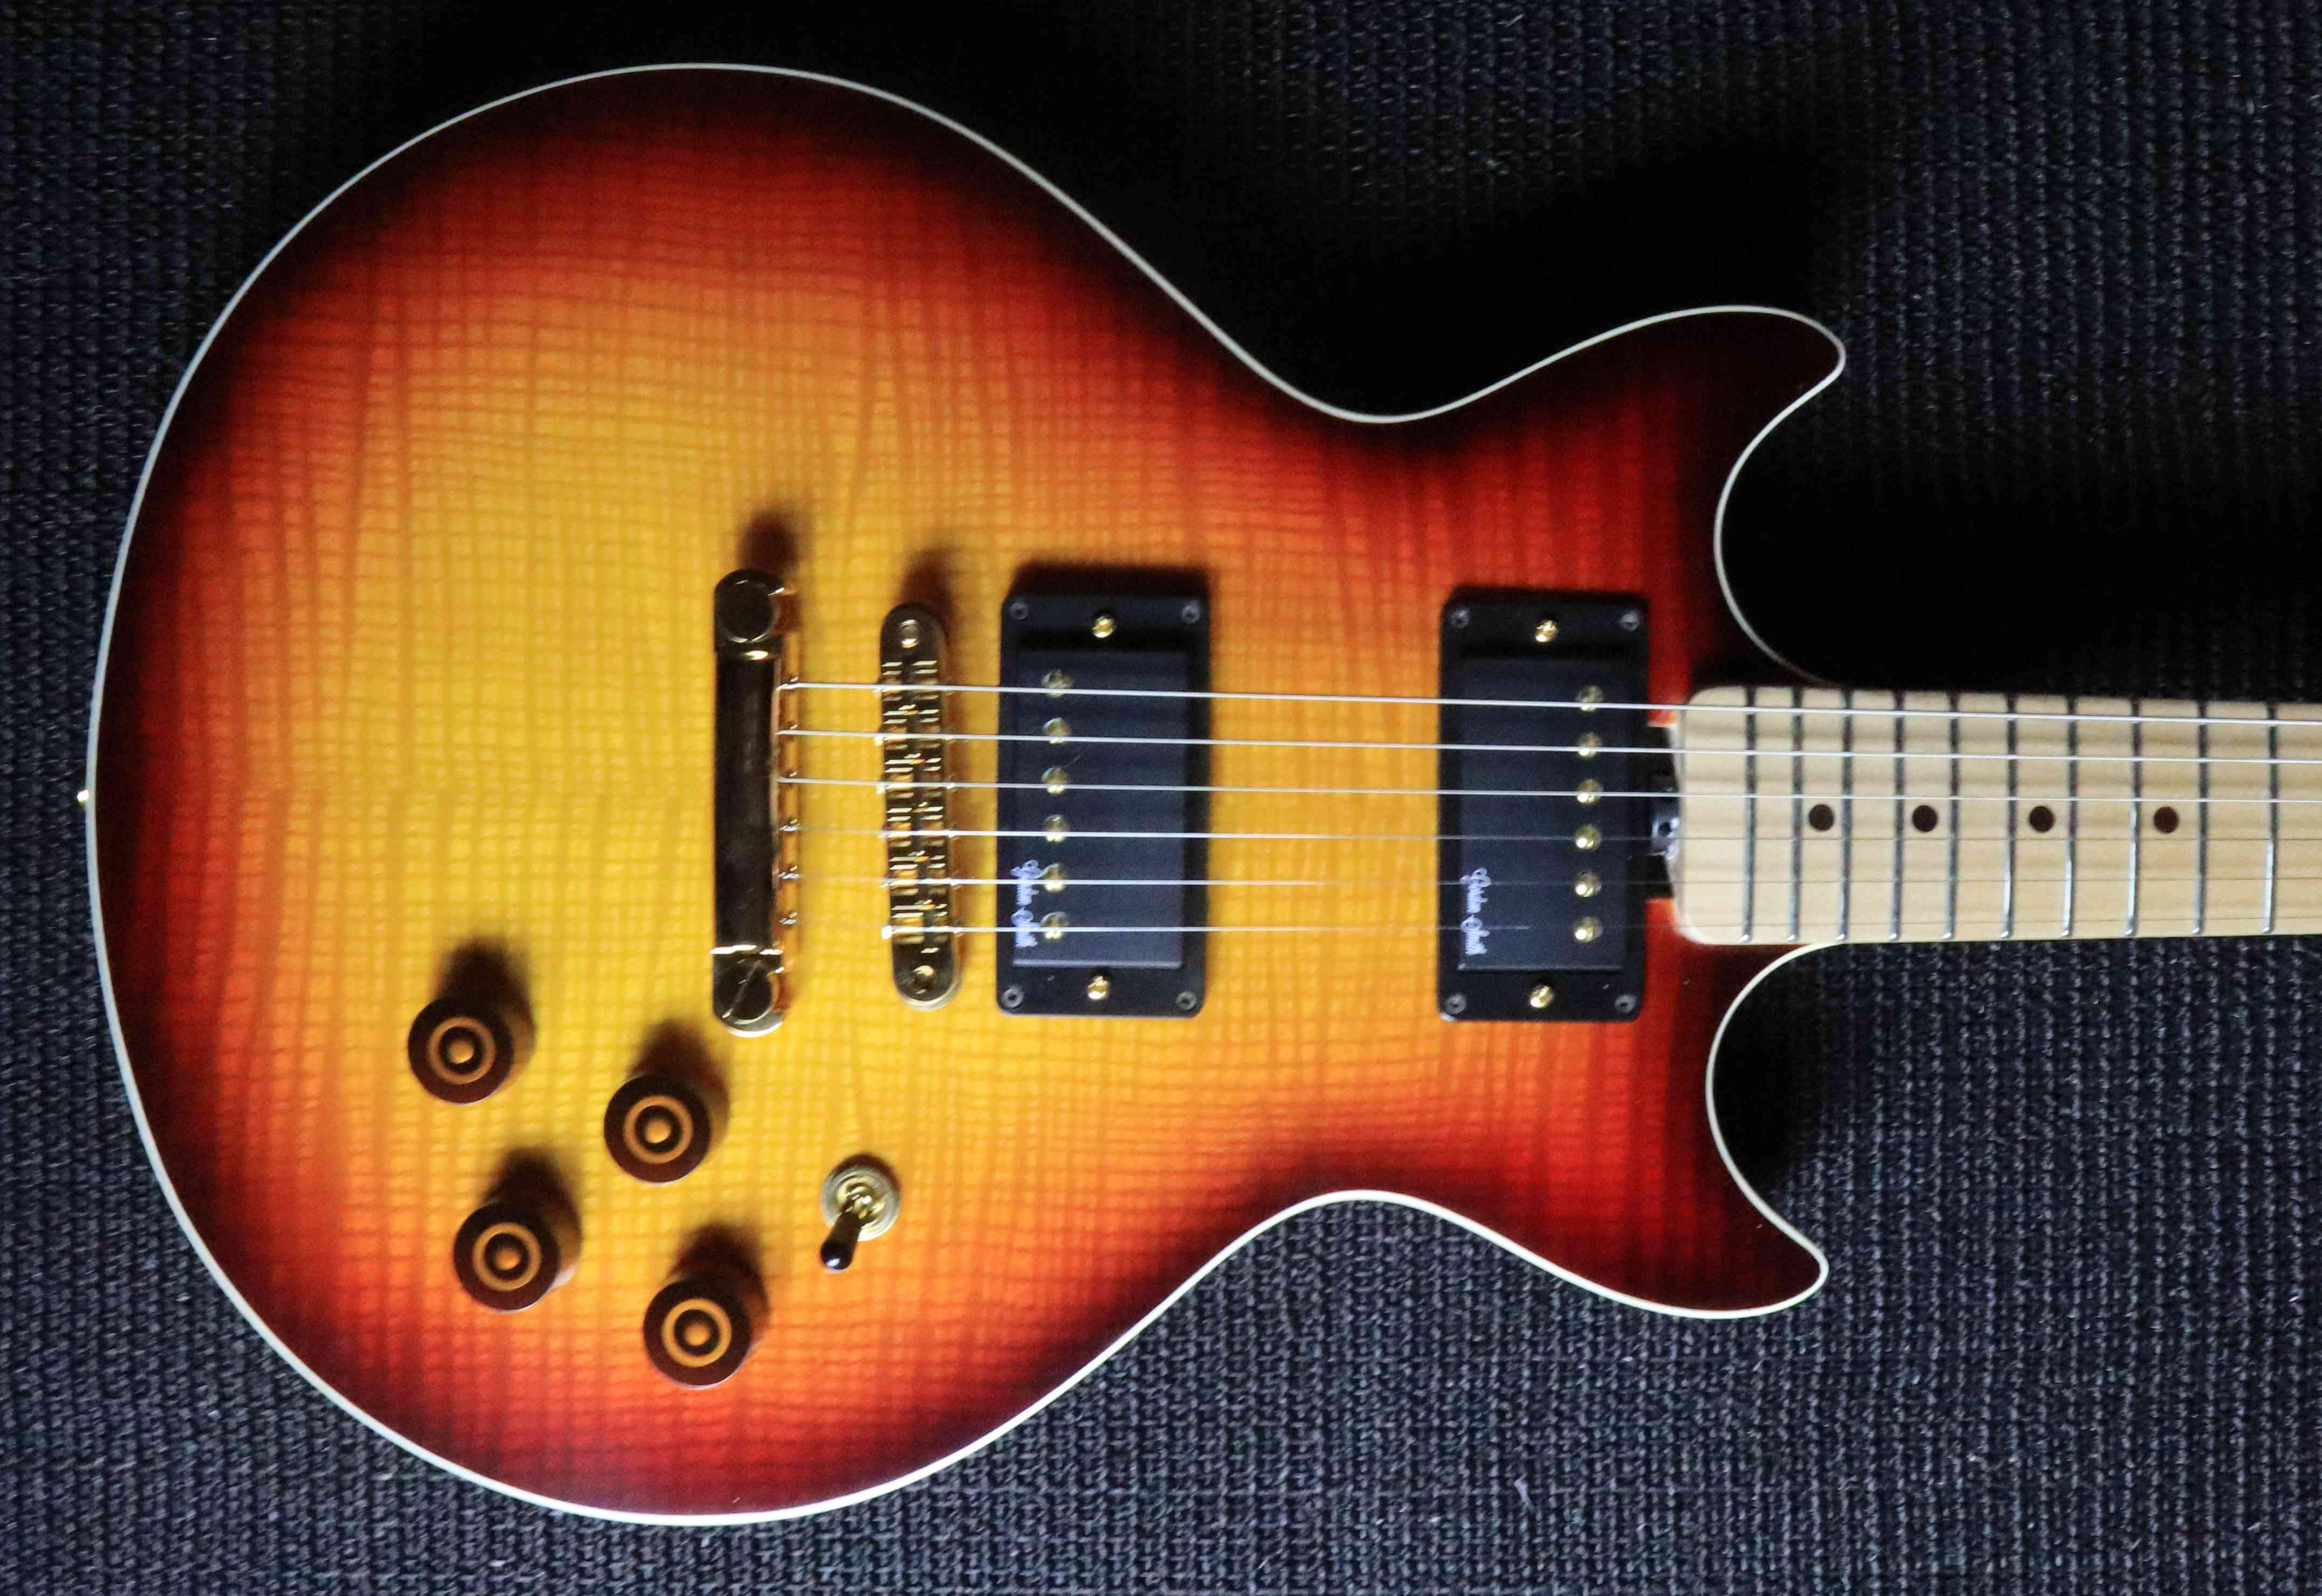 Gordon Smith Heritage Deluxe, Electric Guitar for sale at Richards Guitars.